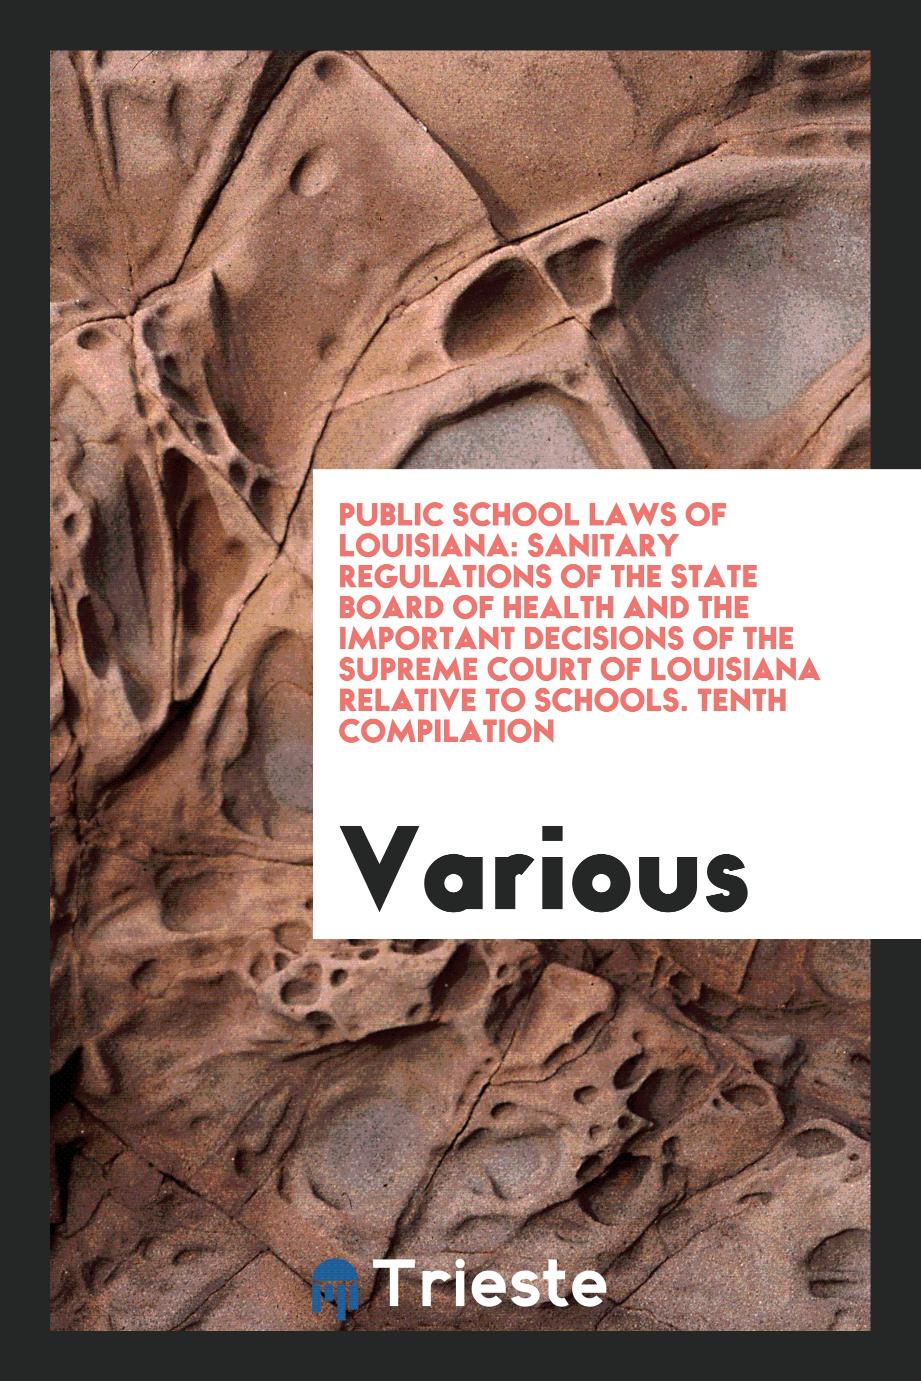 Public School Laws of Louisiana: Sanitary Regulations of the State Board of Health and the Important Decisions of the Supreme Court of Louisiana Relative to Schools. Tenth Compilation